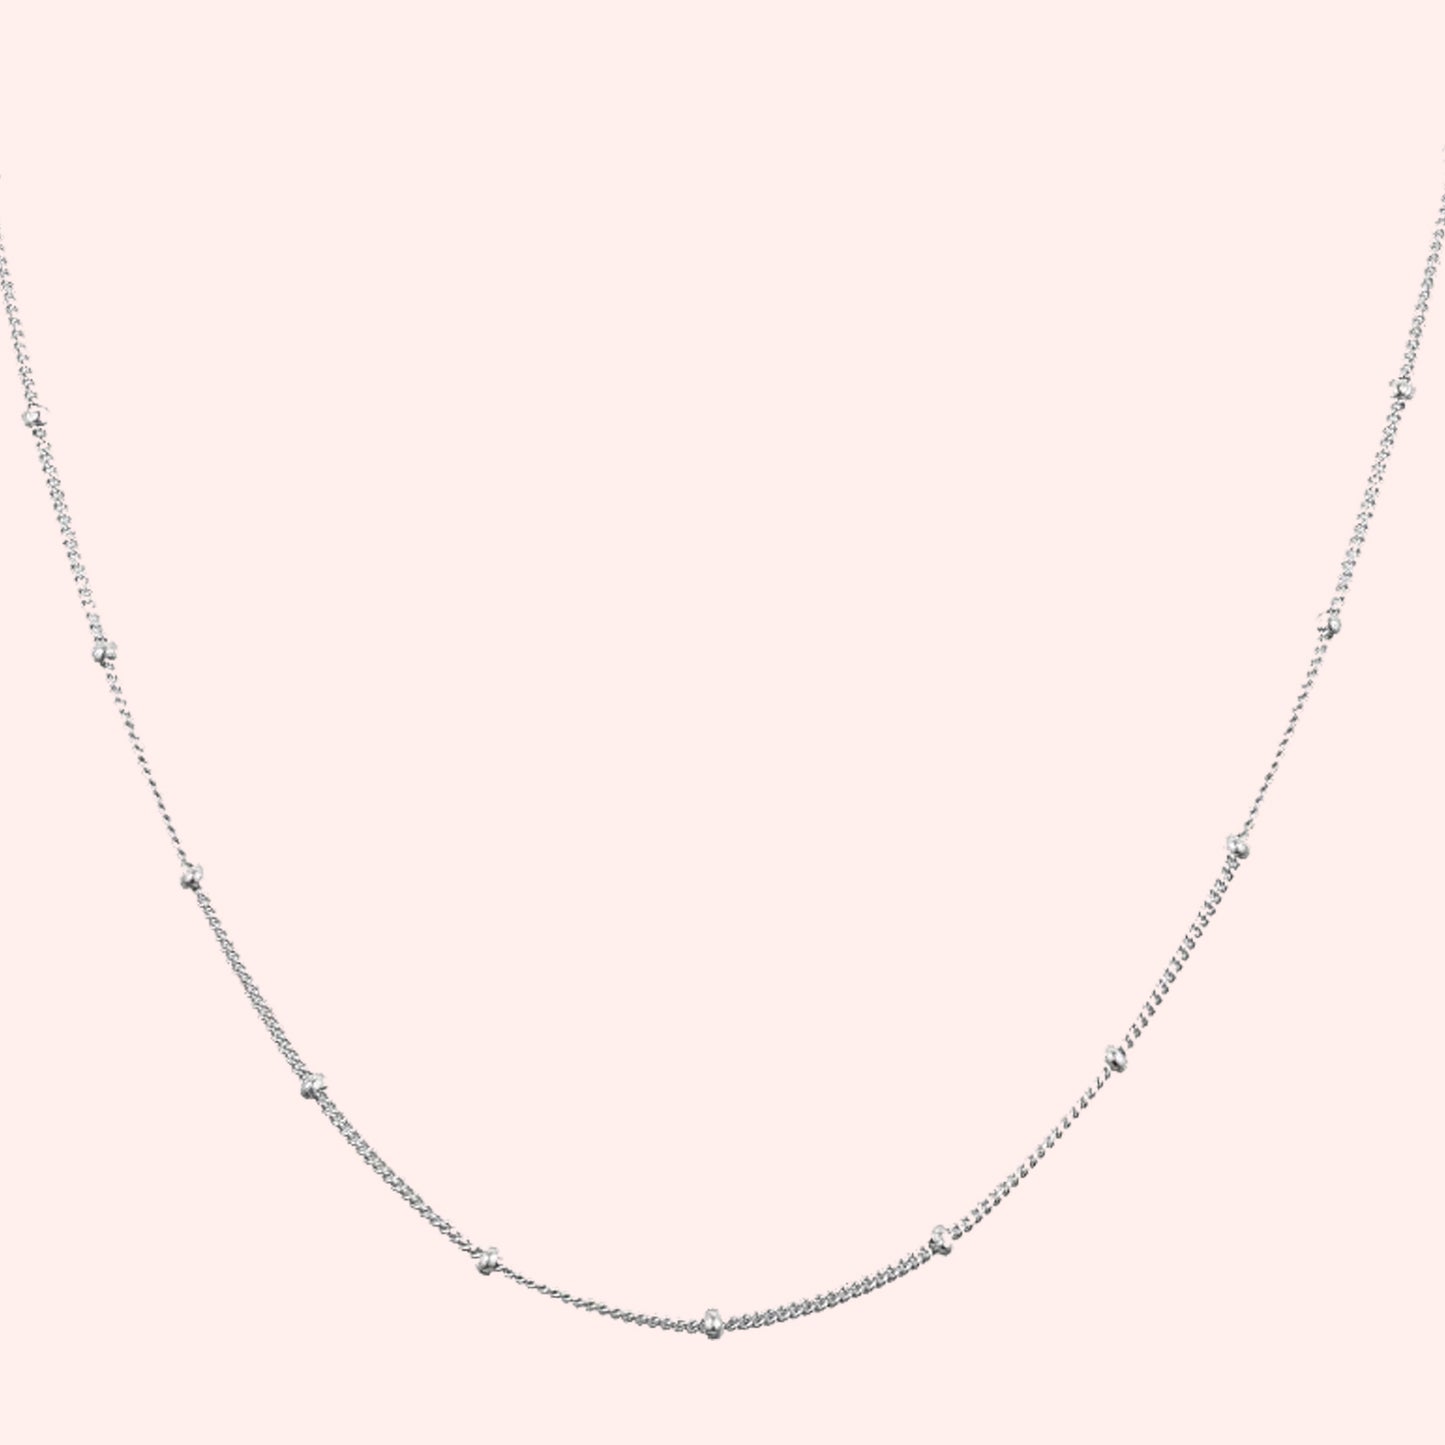 Topfoxx Jewelry Sterling Silver Necklace Whisper Silver Chain